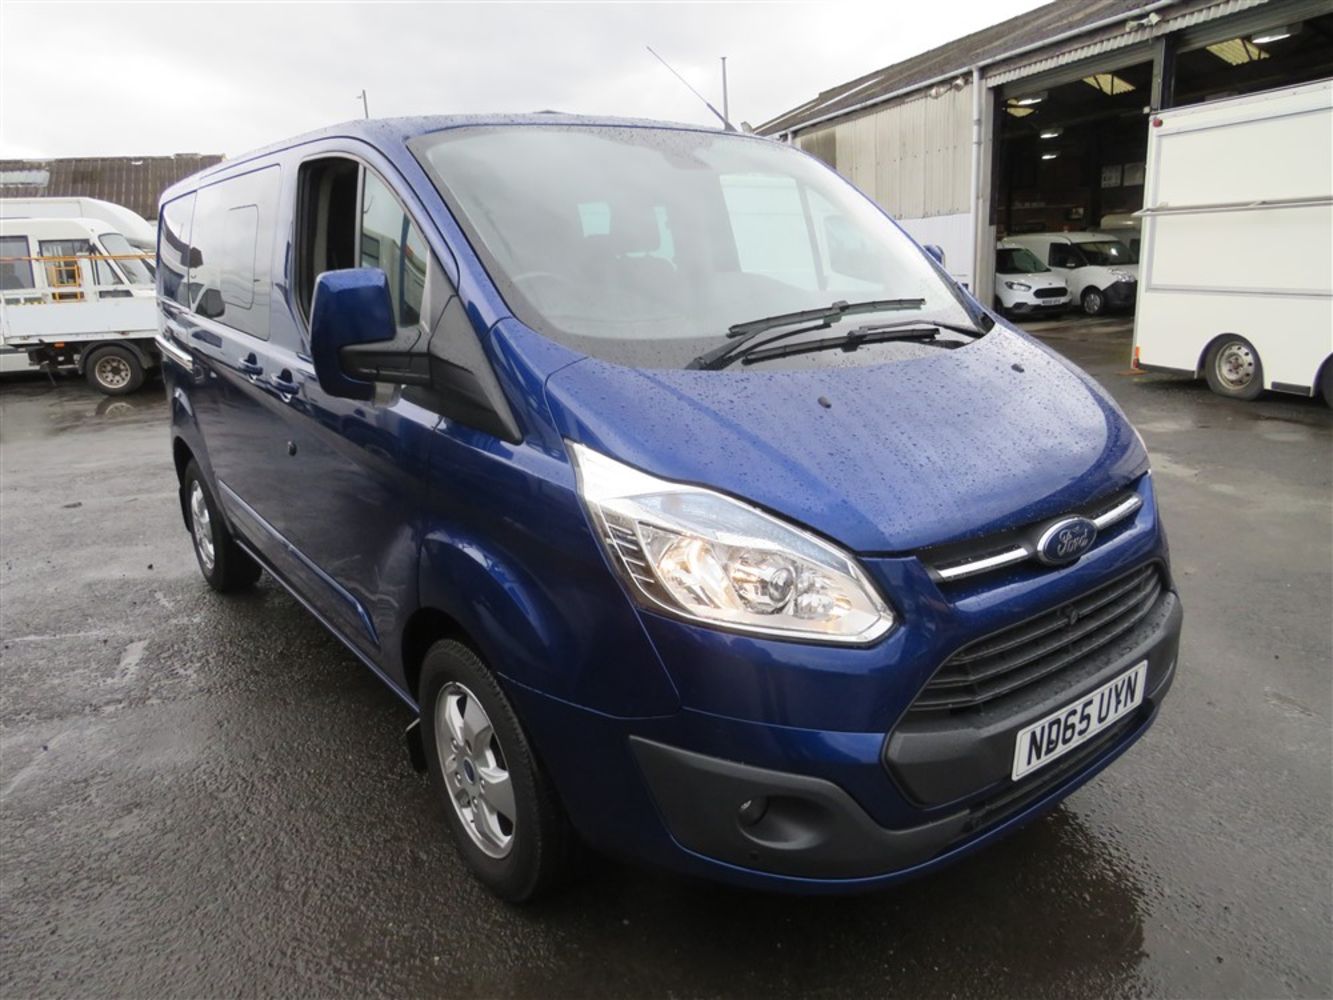 Online Auction - Light Commercial Vehicles direct from various sources inc councils, plc's, leasing companies, private & trade